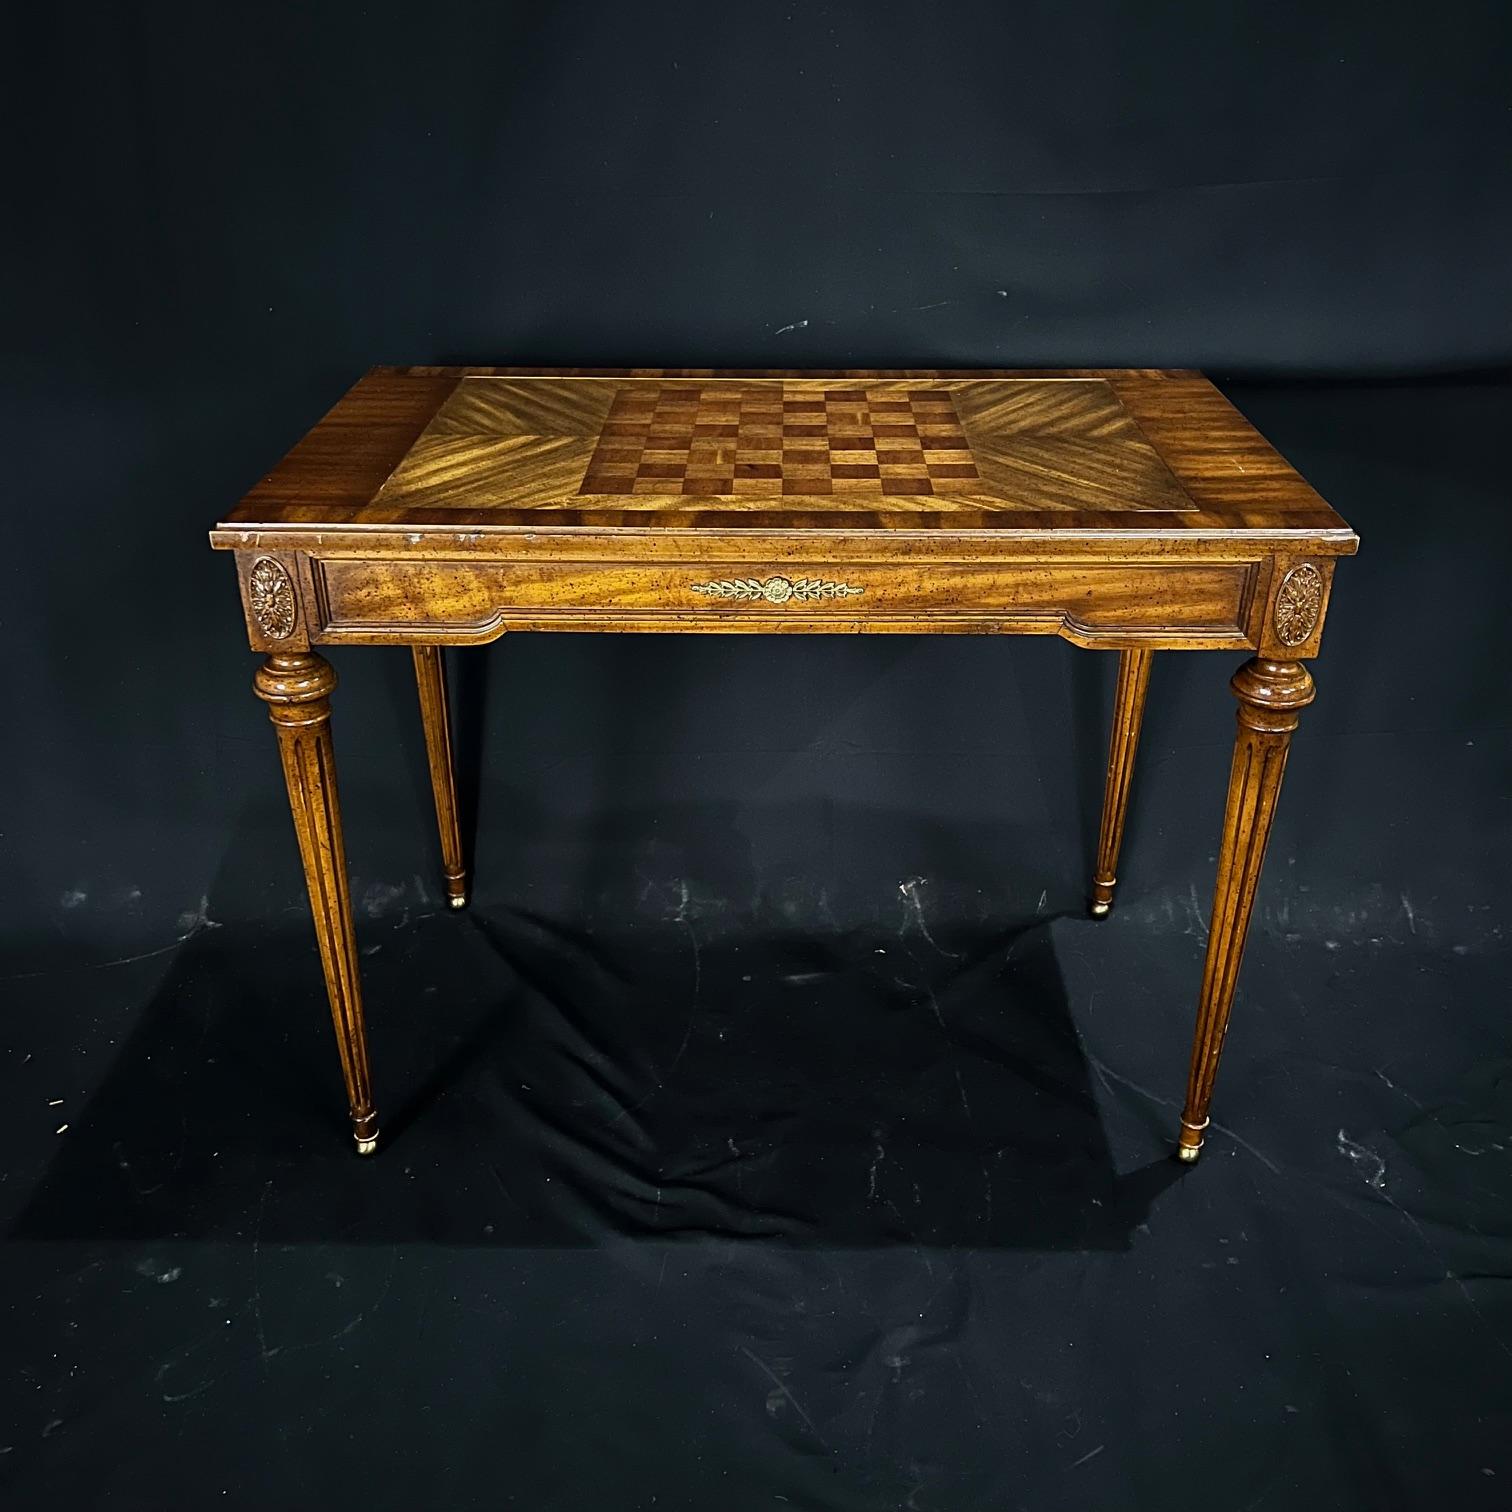  
Elegant and versatile French Louis XVI style console game table with hidden backgammon board. Top flips over for beautiful inlaid chess or checkers board, or remove the top completely for backgammon game board. Flip top for lovely wood surface.